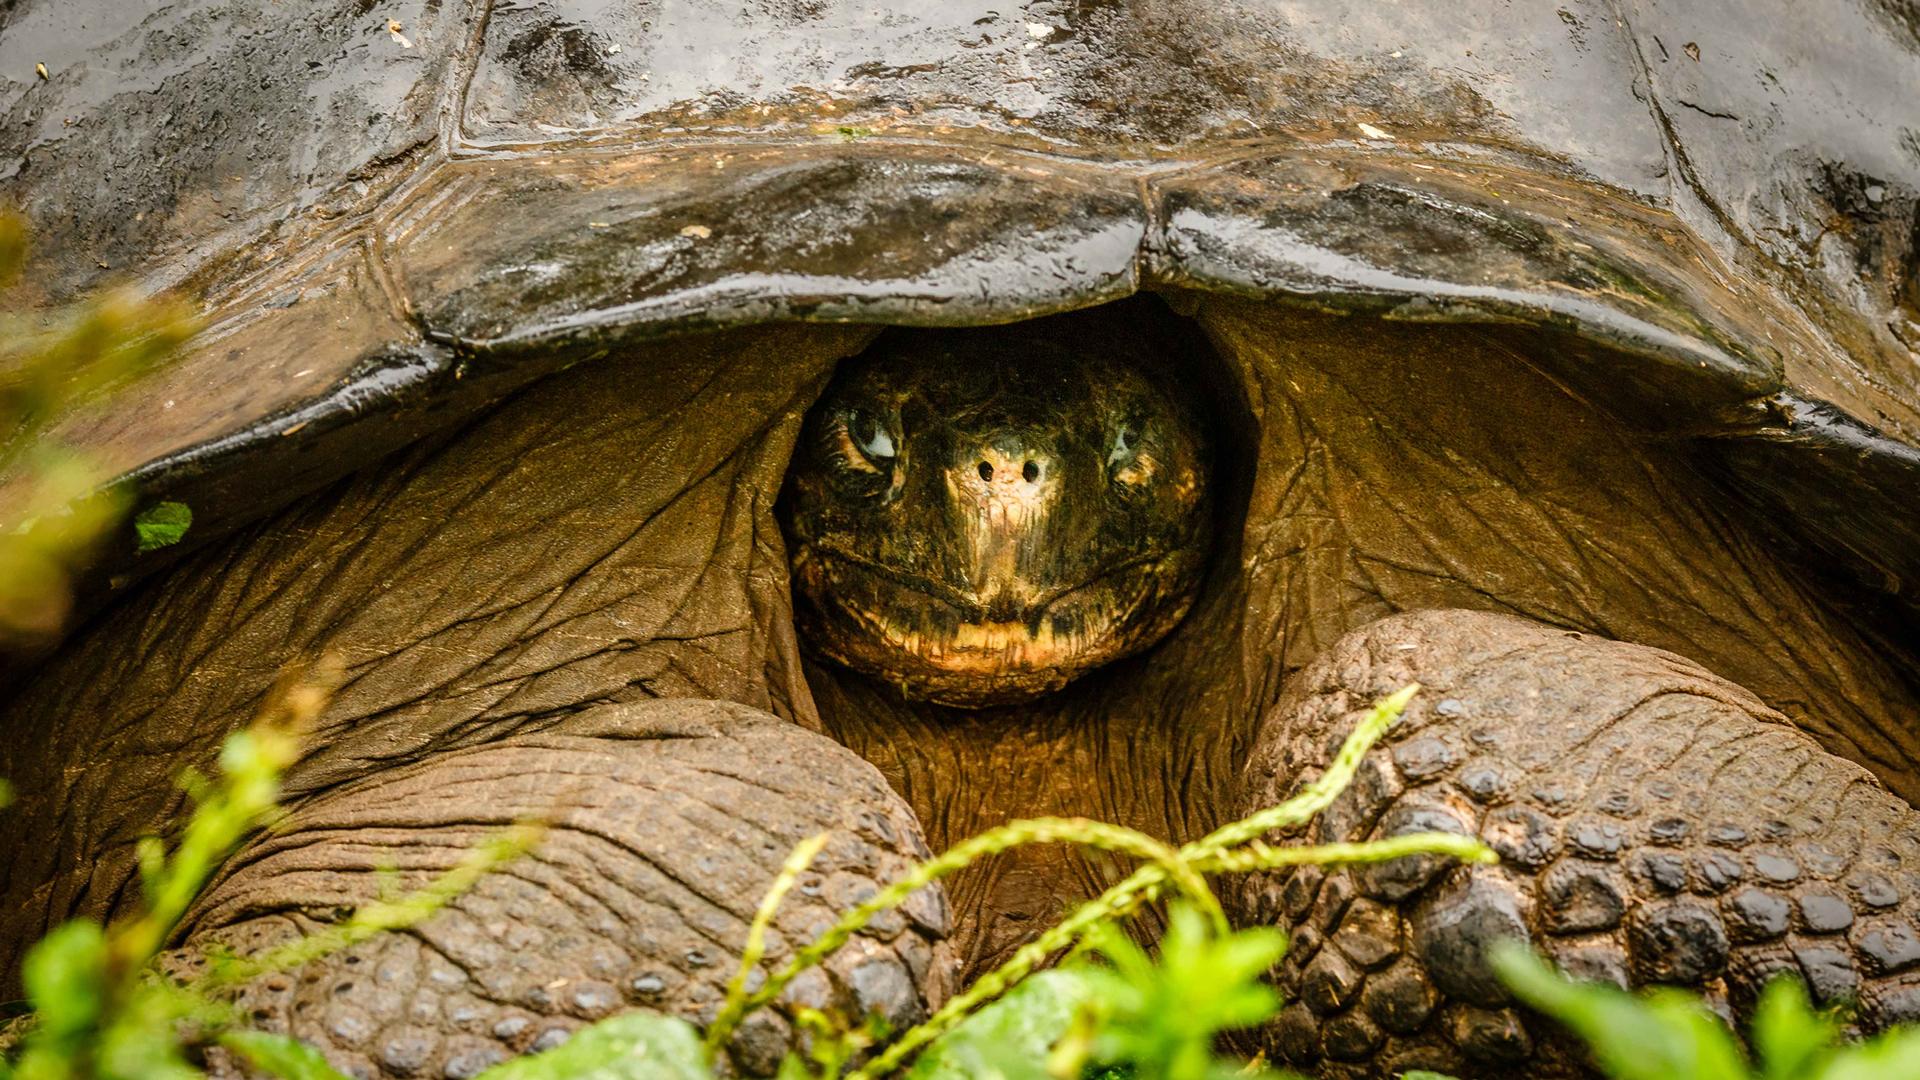 A close-up of a giant land tortoise in the Santa Cruz highlands of the Galápagos Islands. 